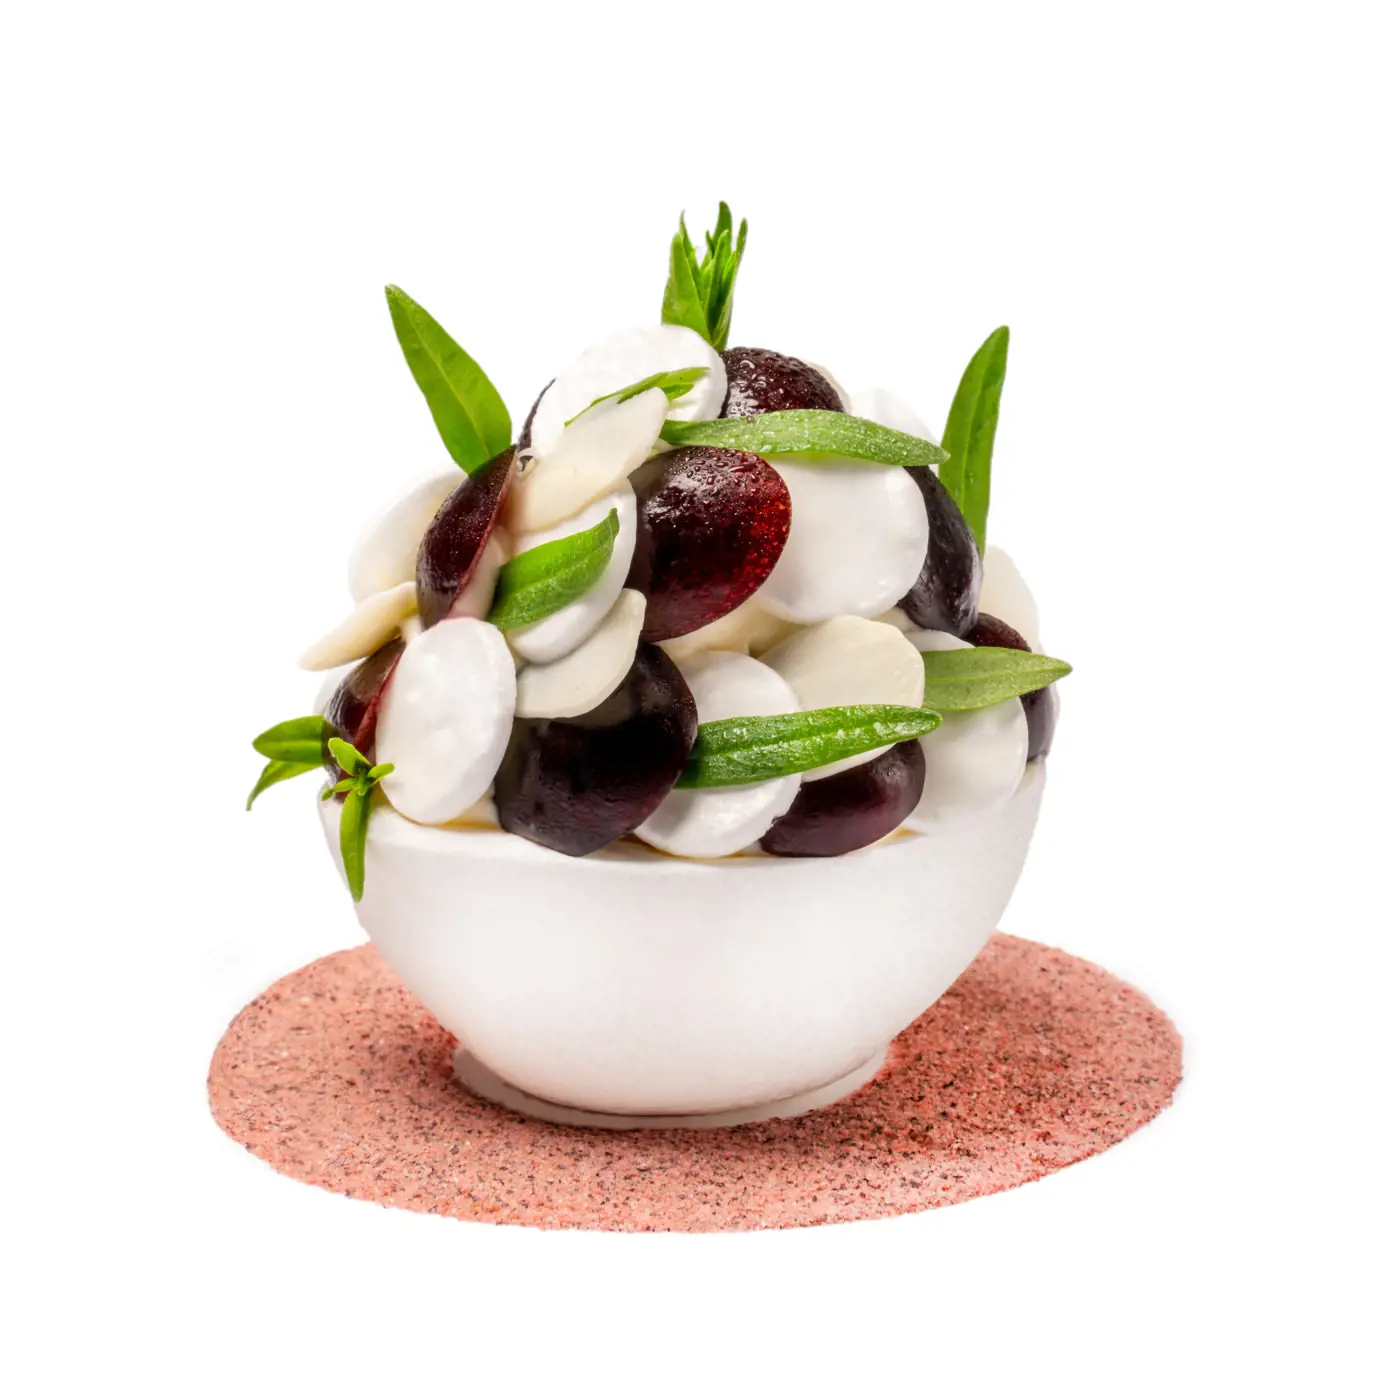 English cherry, meringue, almonds and anise hyssop.